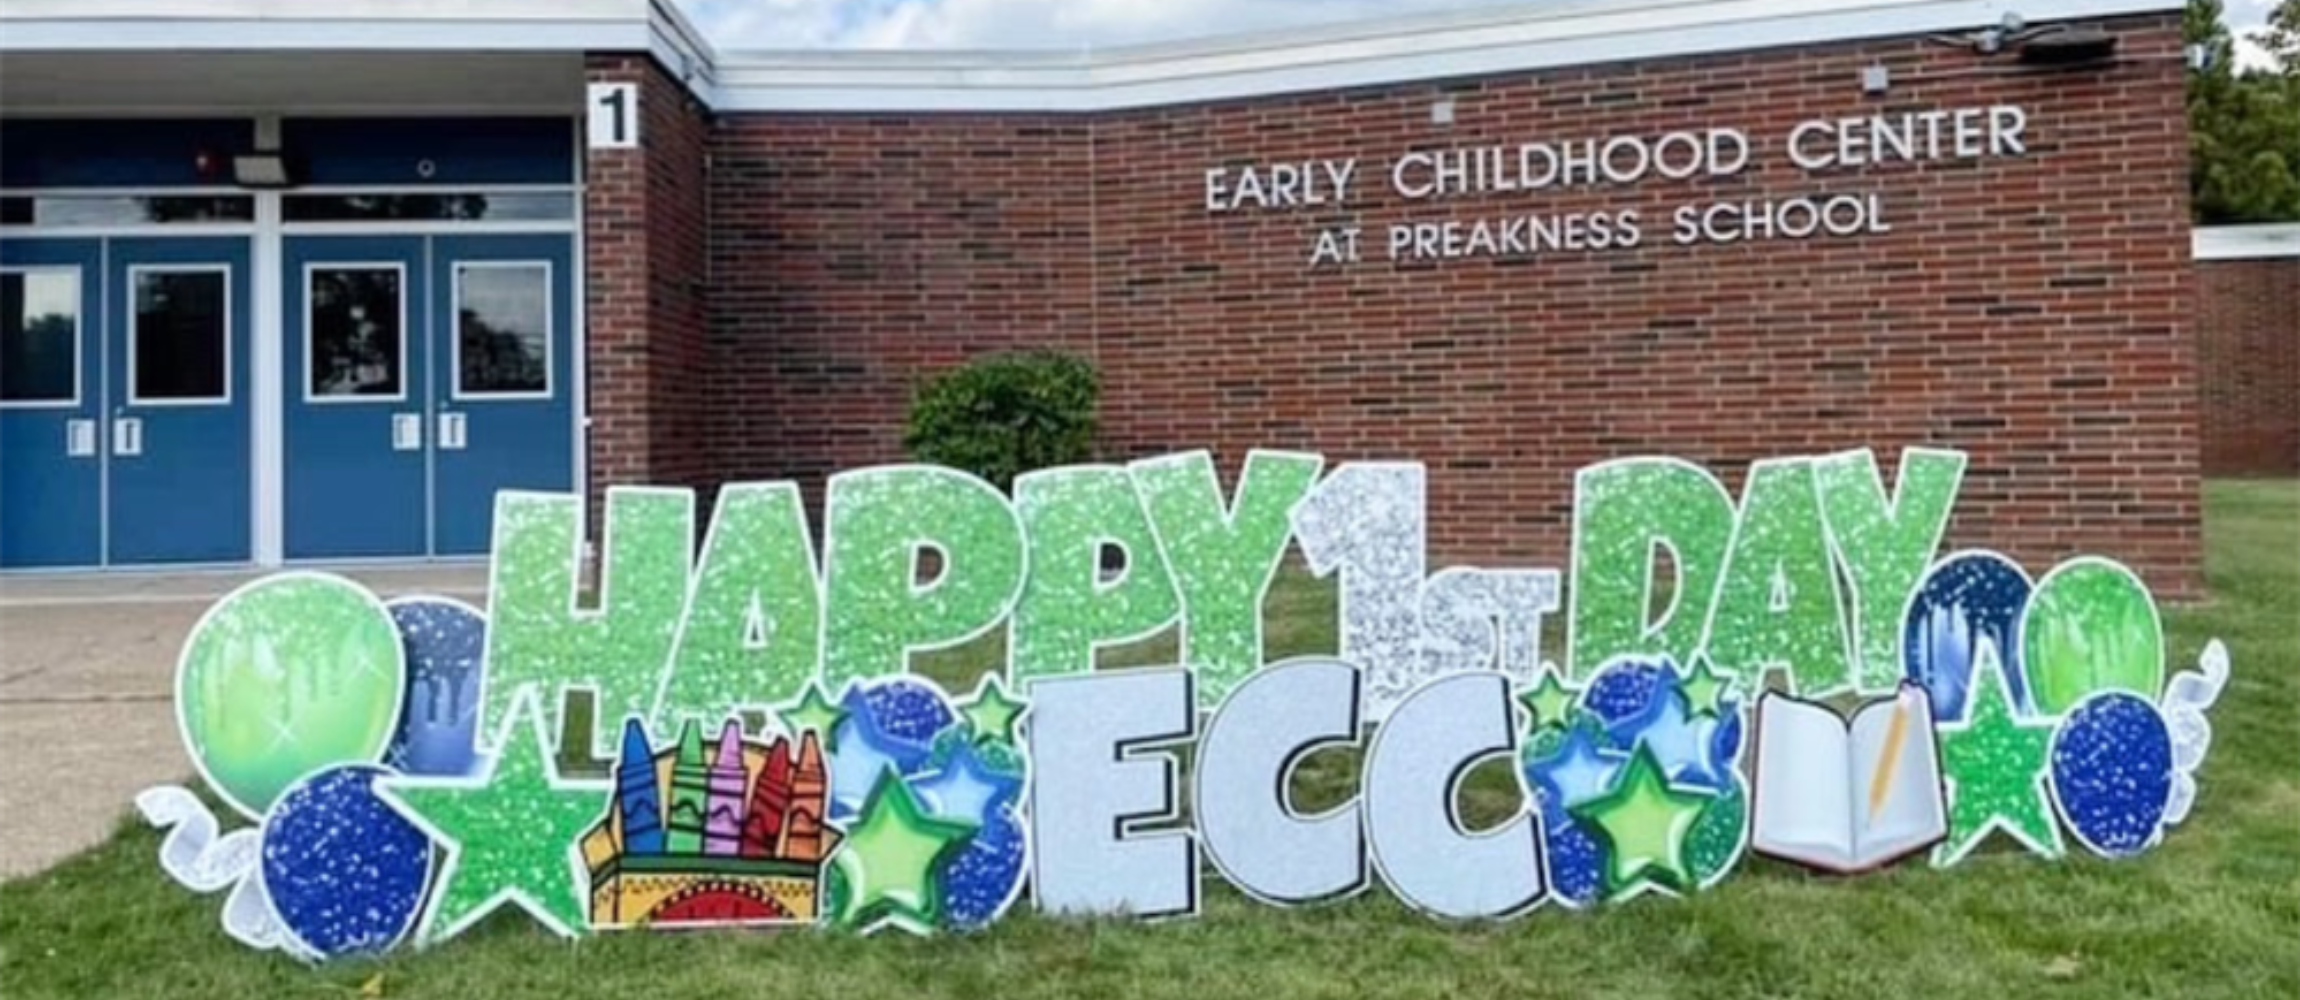 happy first day ECC sign hanging up outside of the school building